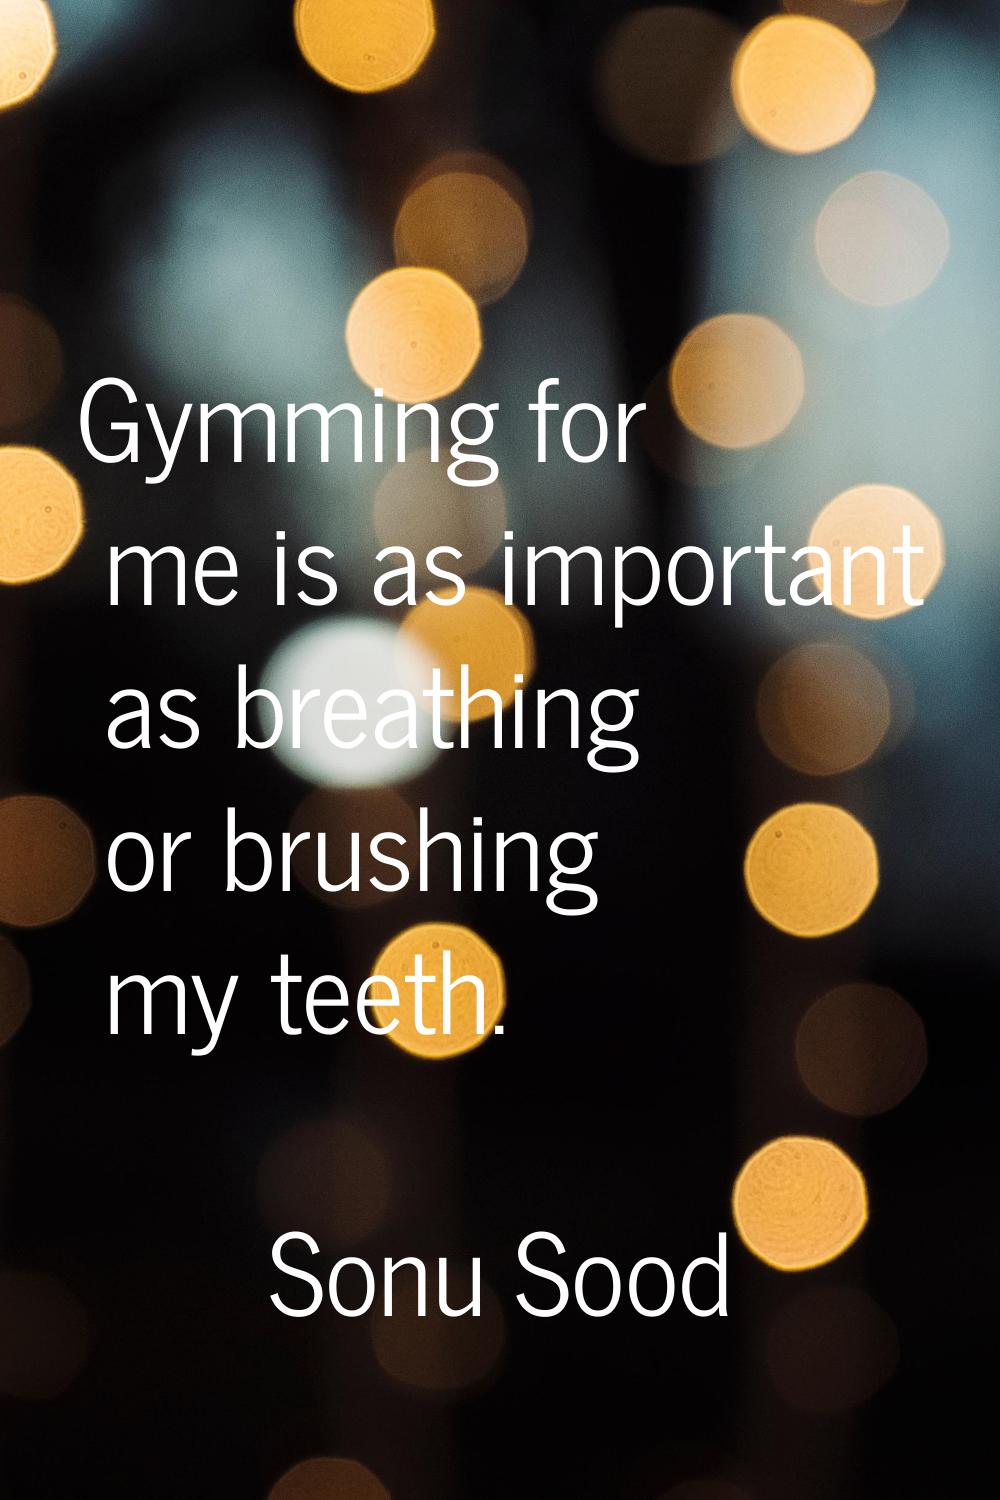 Gymming for me is as important as breathing or brushing my teeth.